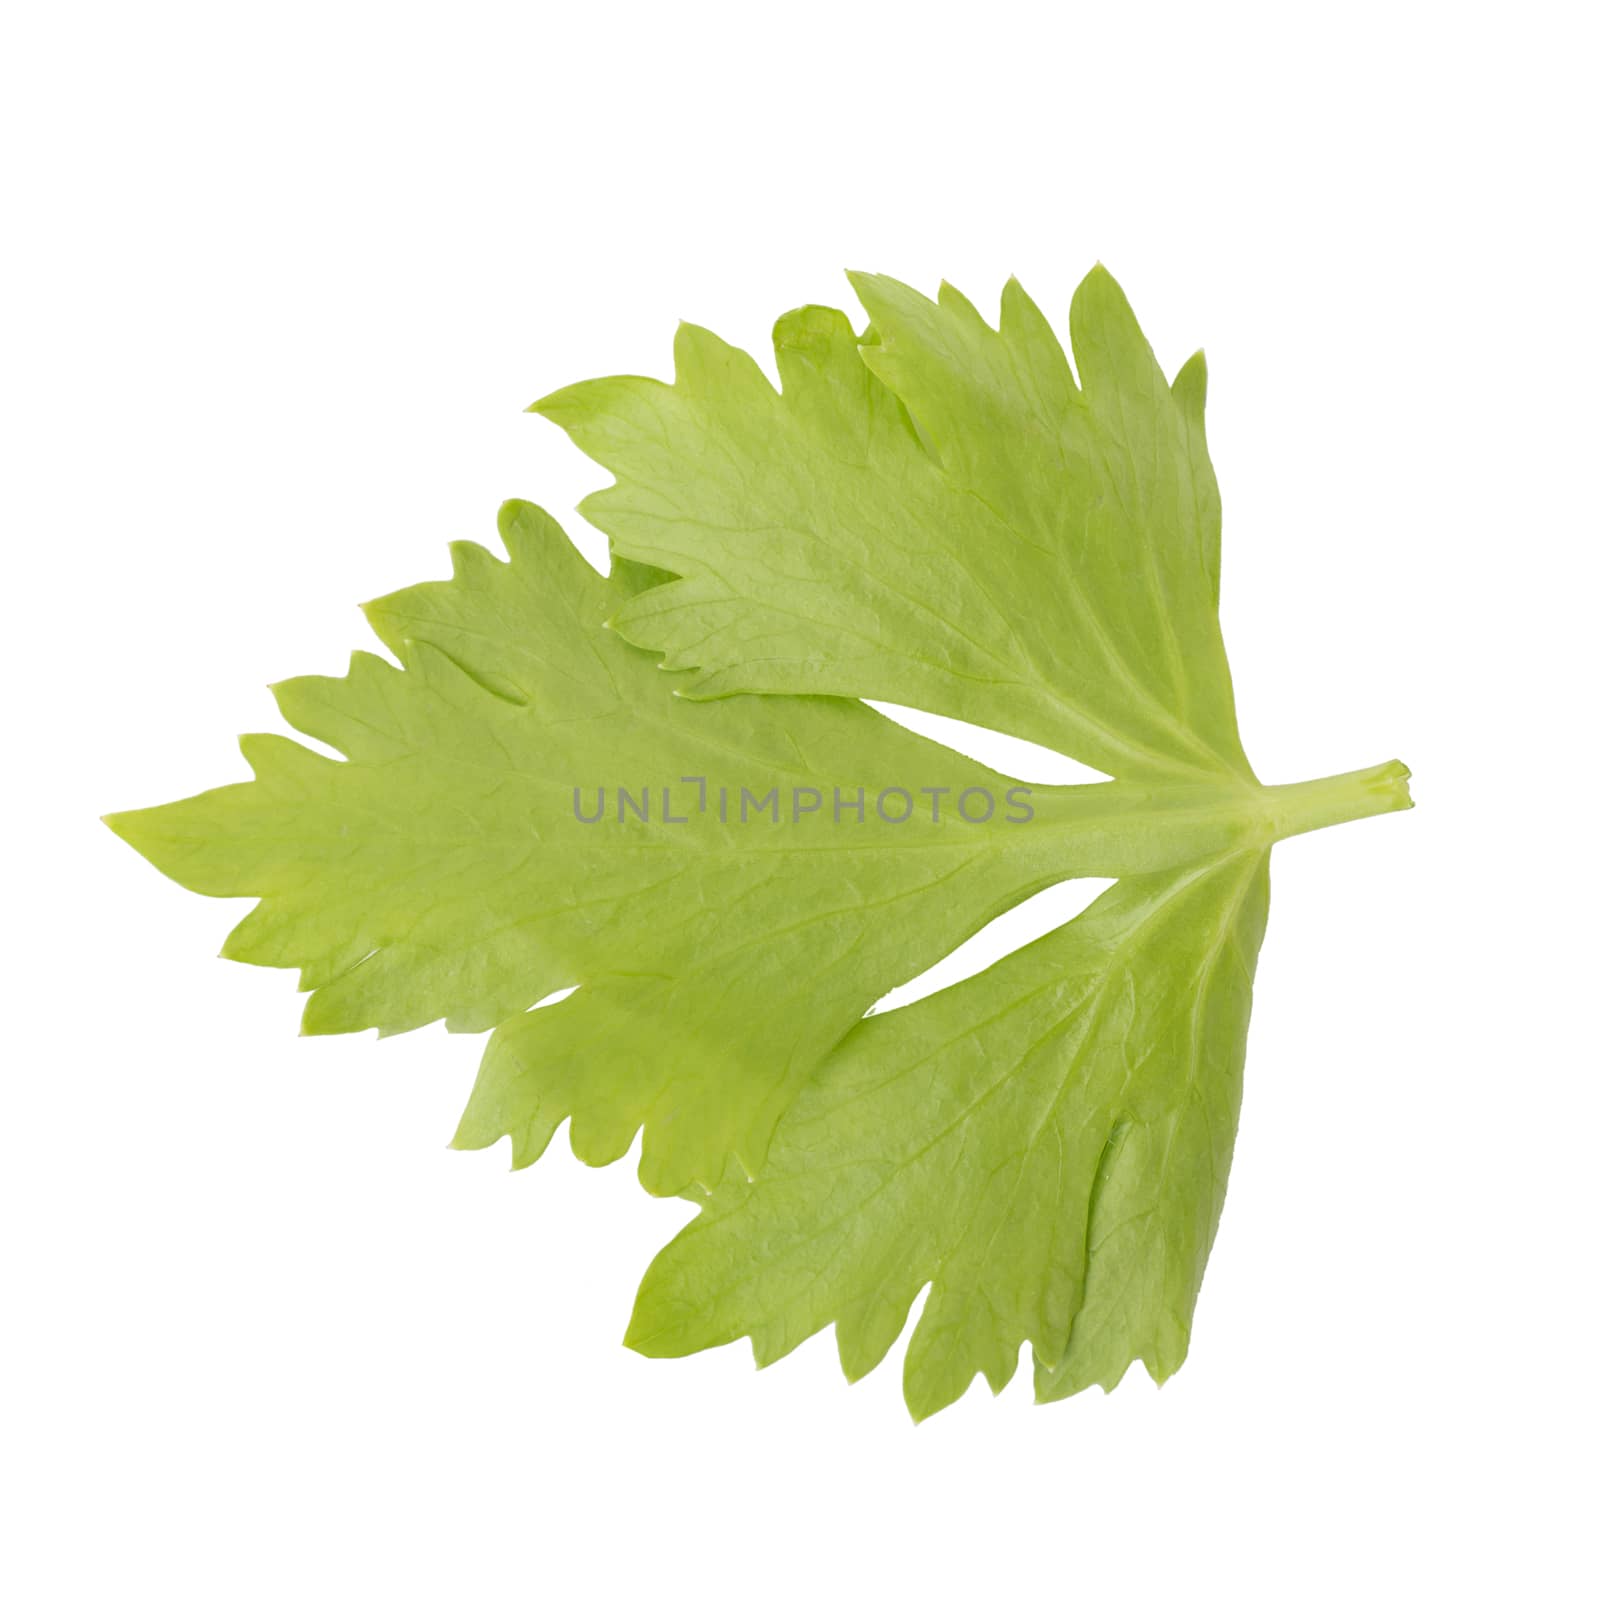 Celery or parsley leaf isolated on white background. Top view by kaiskynet